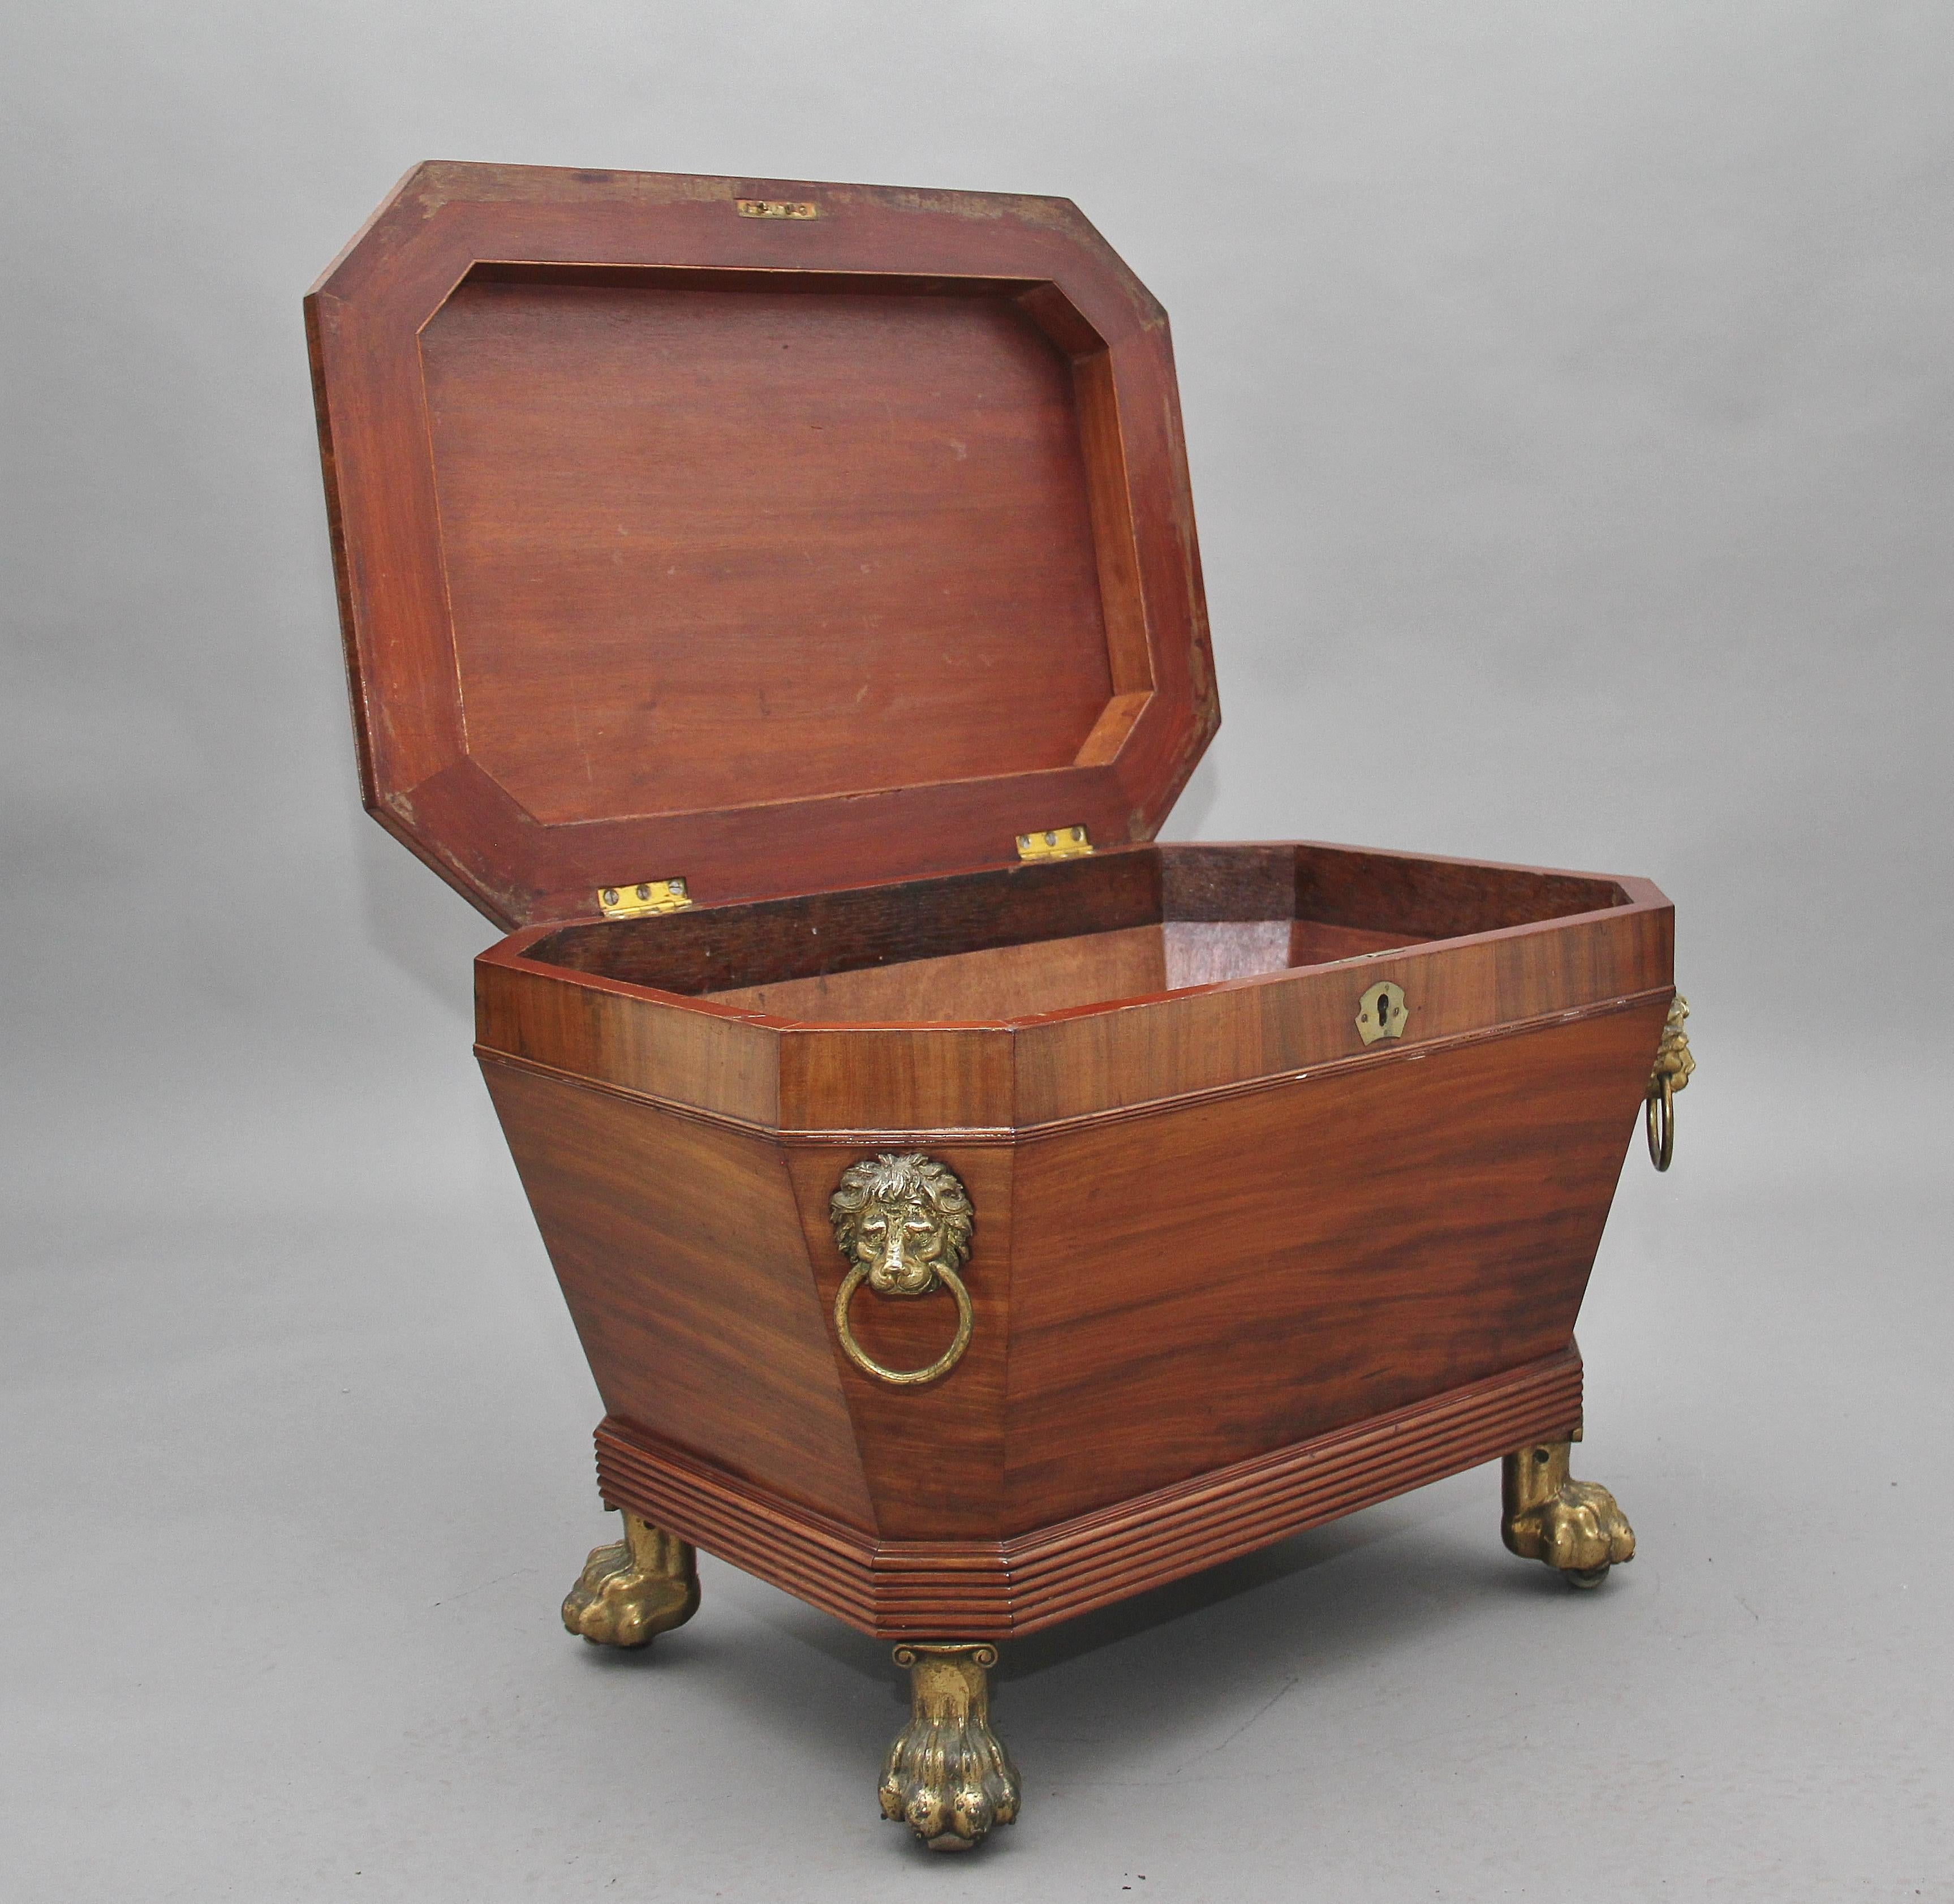 A superb quality Regency mahogany sarcophagus wine cooler, having a lovely figured top which is decorated with ebony inlay, bold brass lion mask handles to the sides, a reeded apron at the bottom of the cooler and standing on brass lion paw feet.